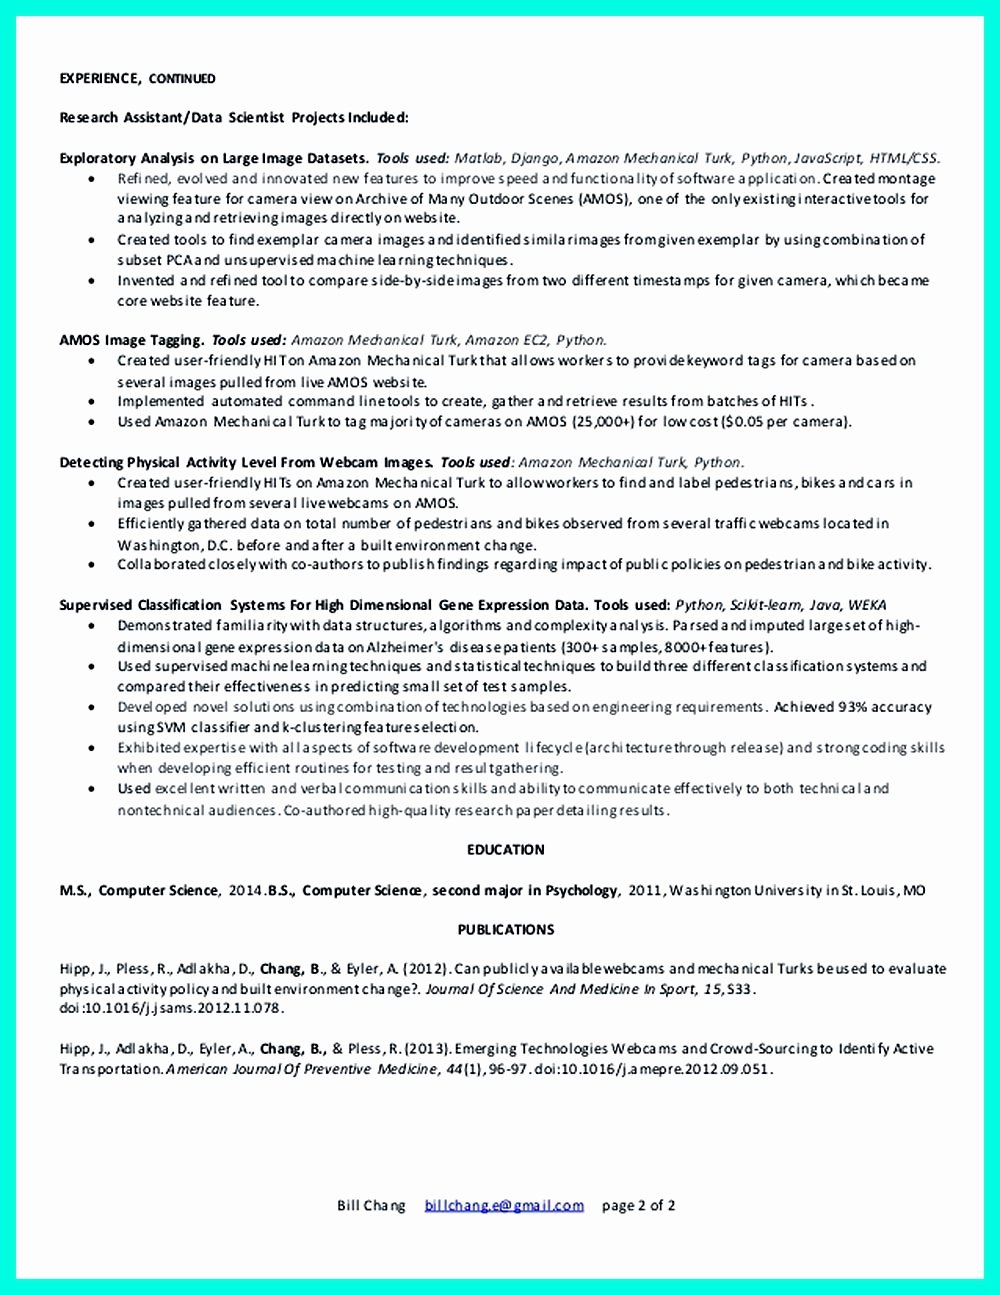 Data Scientist Resume Include Everything About Your